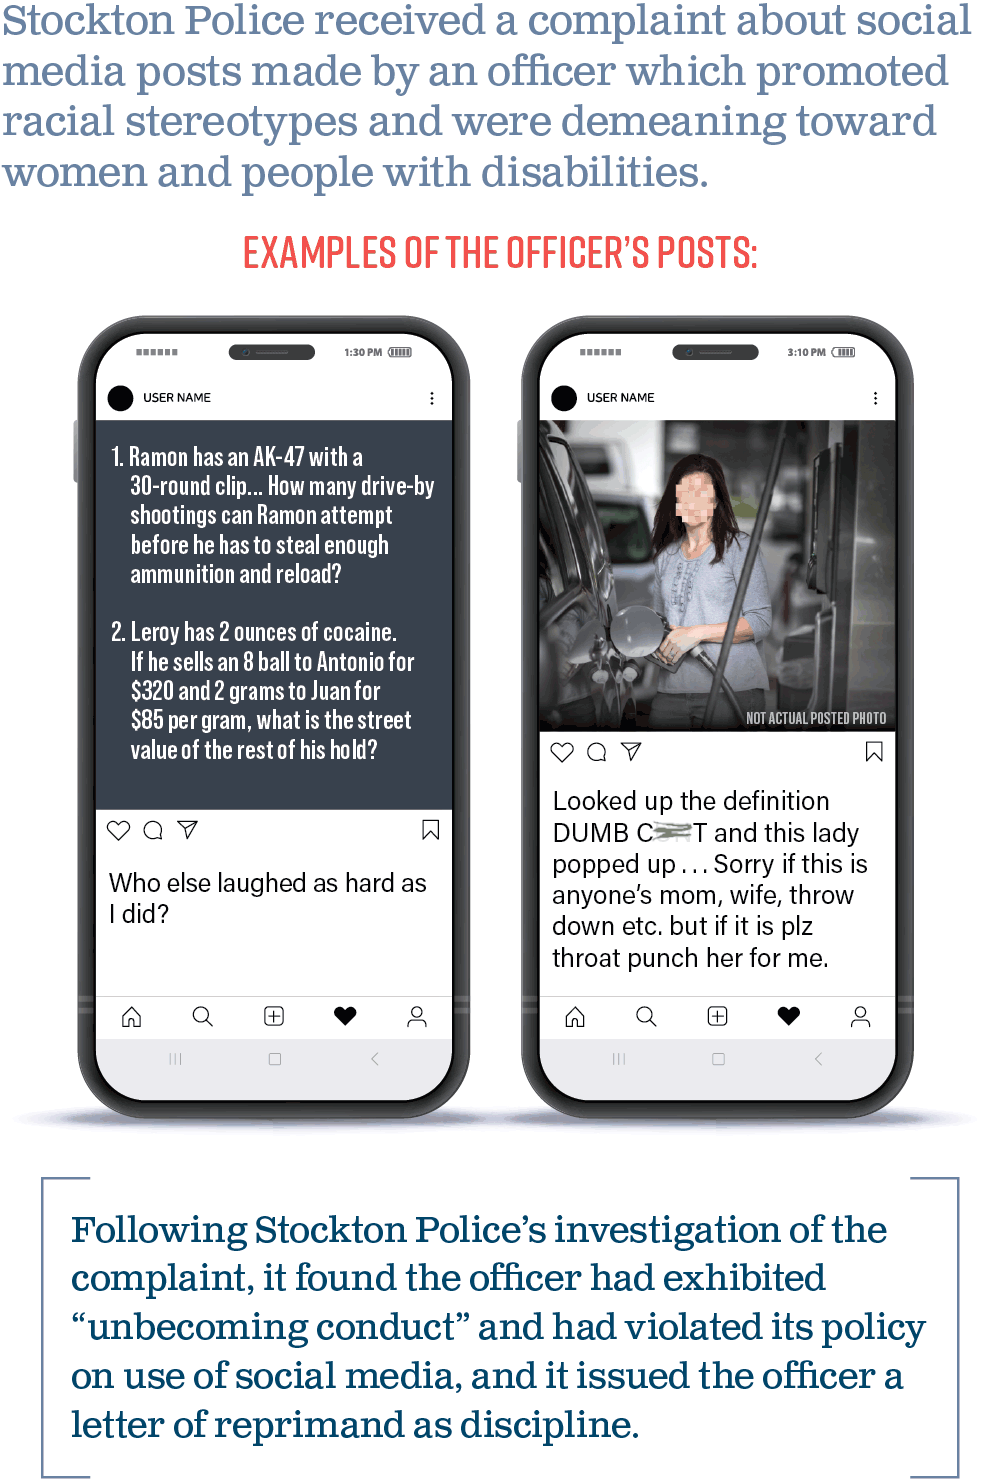 A graphic depicting examples of a Stockton Police officer's biased social media posts that were the subject of a complaint and investigation.